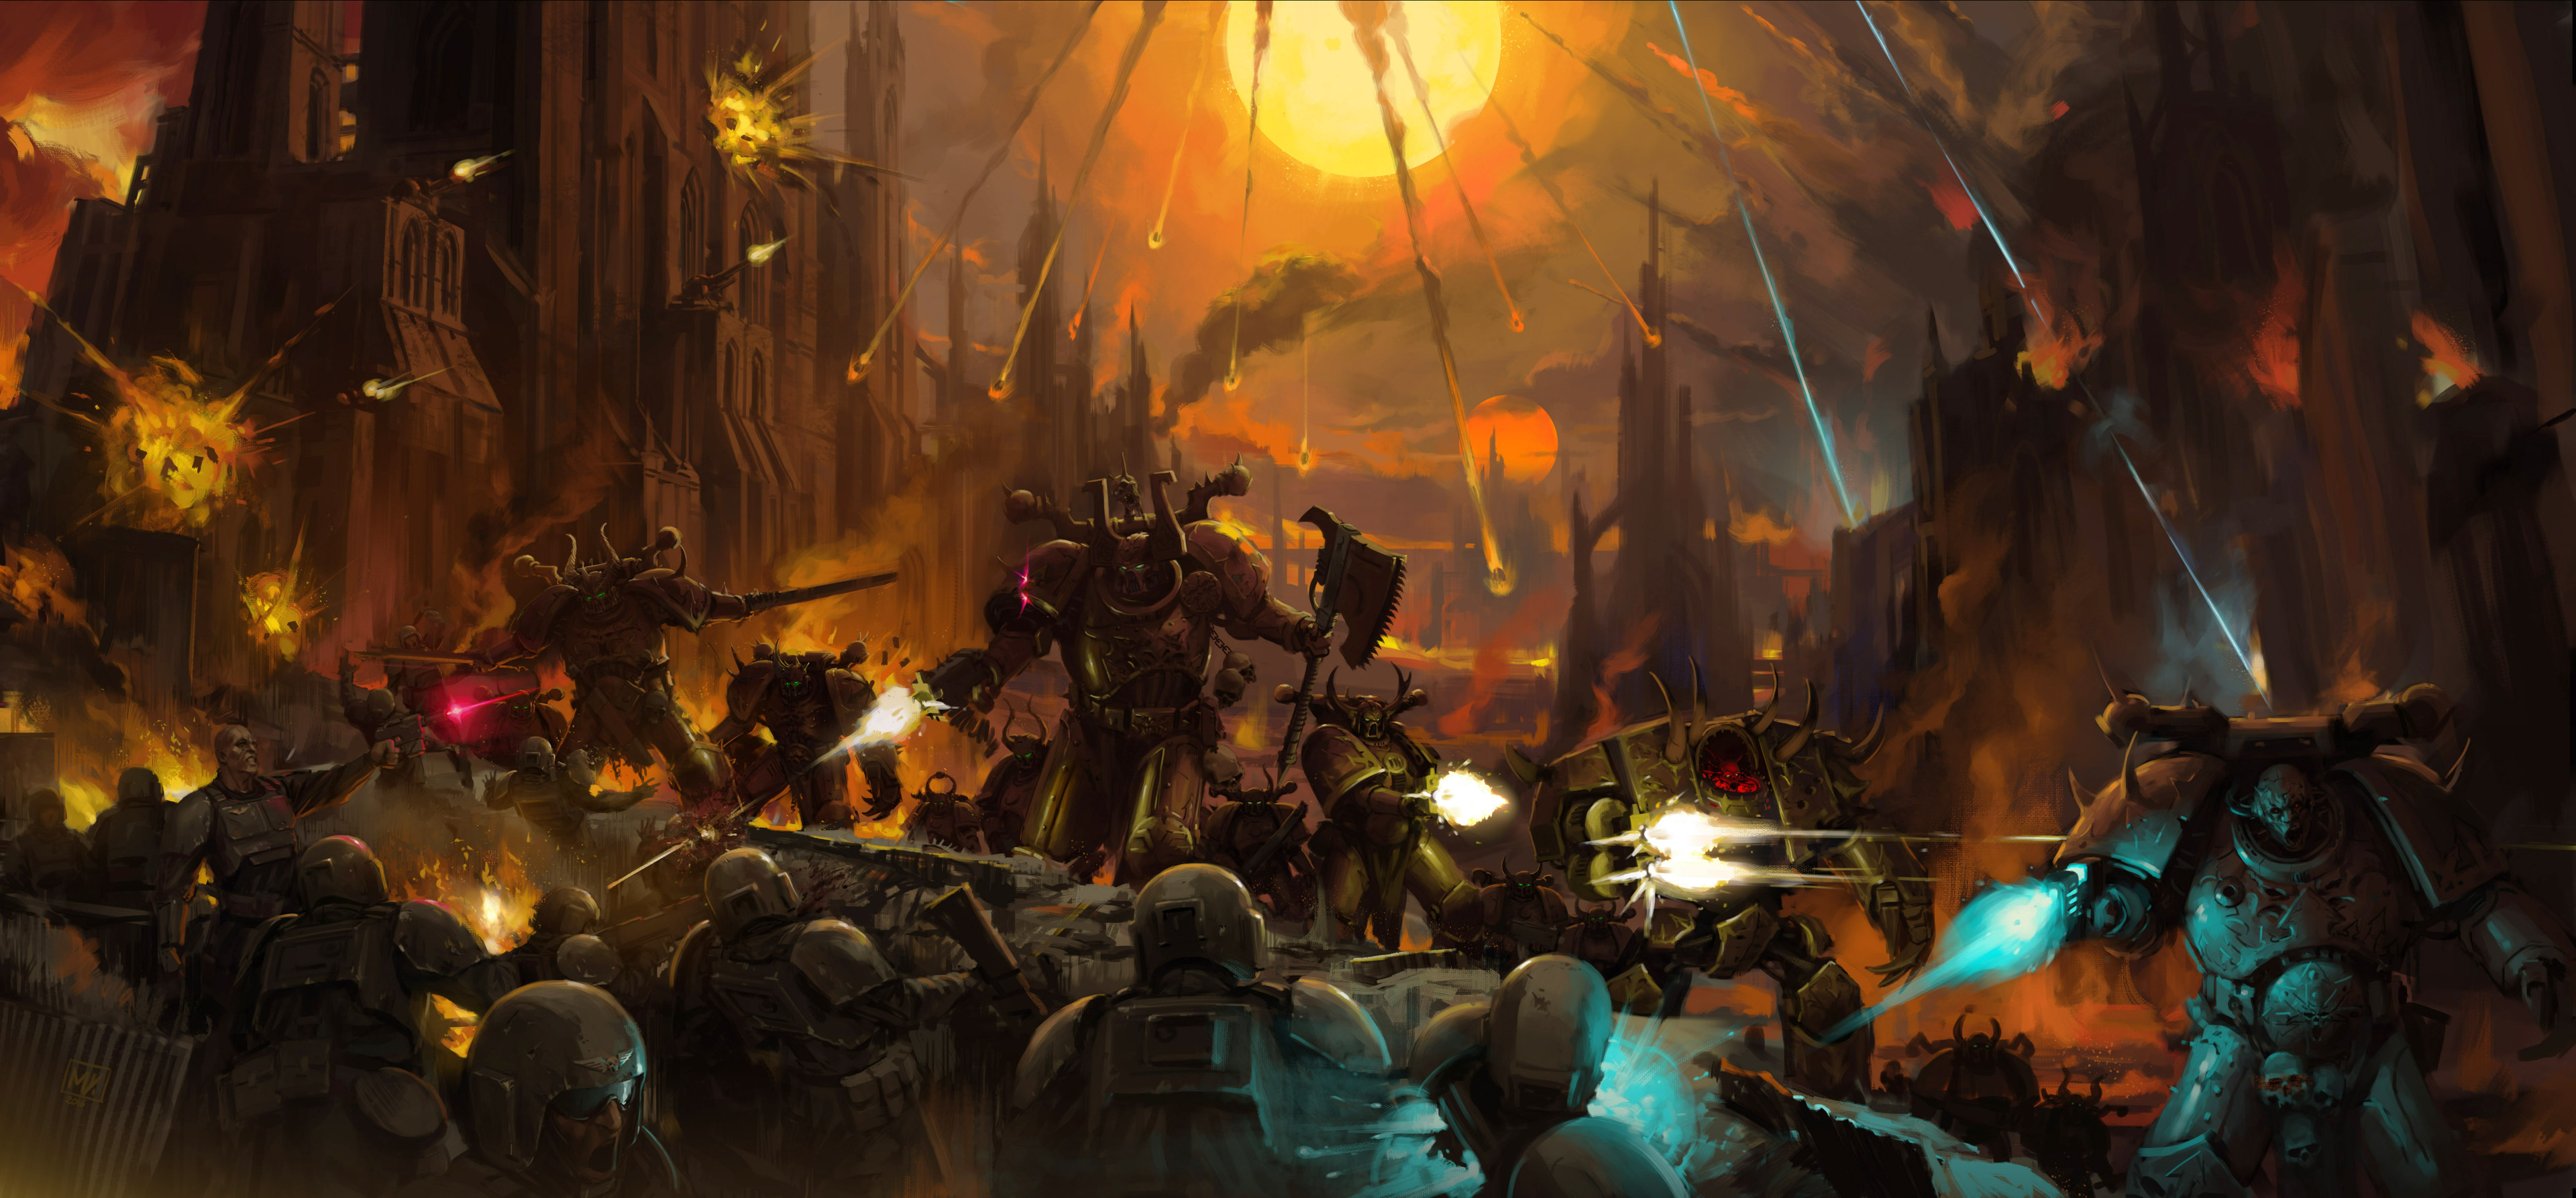 Science Fiction Warhammer 40 000 Space Marines War Battle Imperium Of Man Chaos Space Marine Chainax 3840x1786